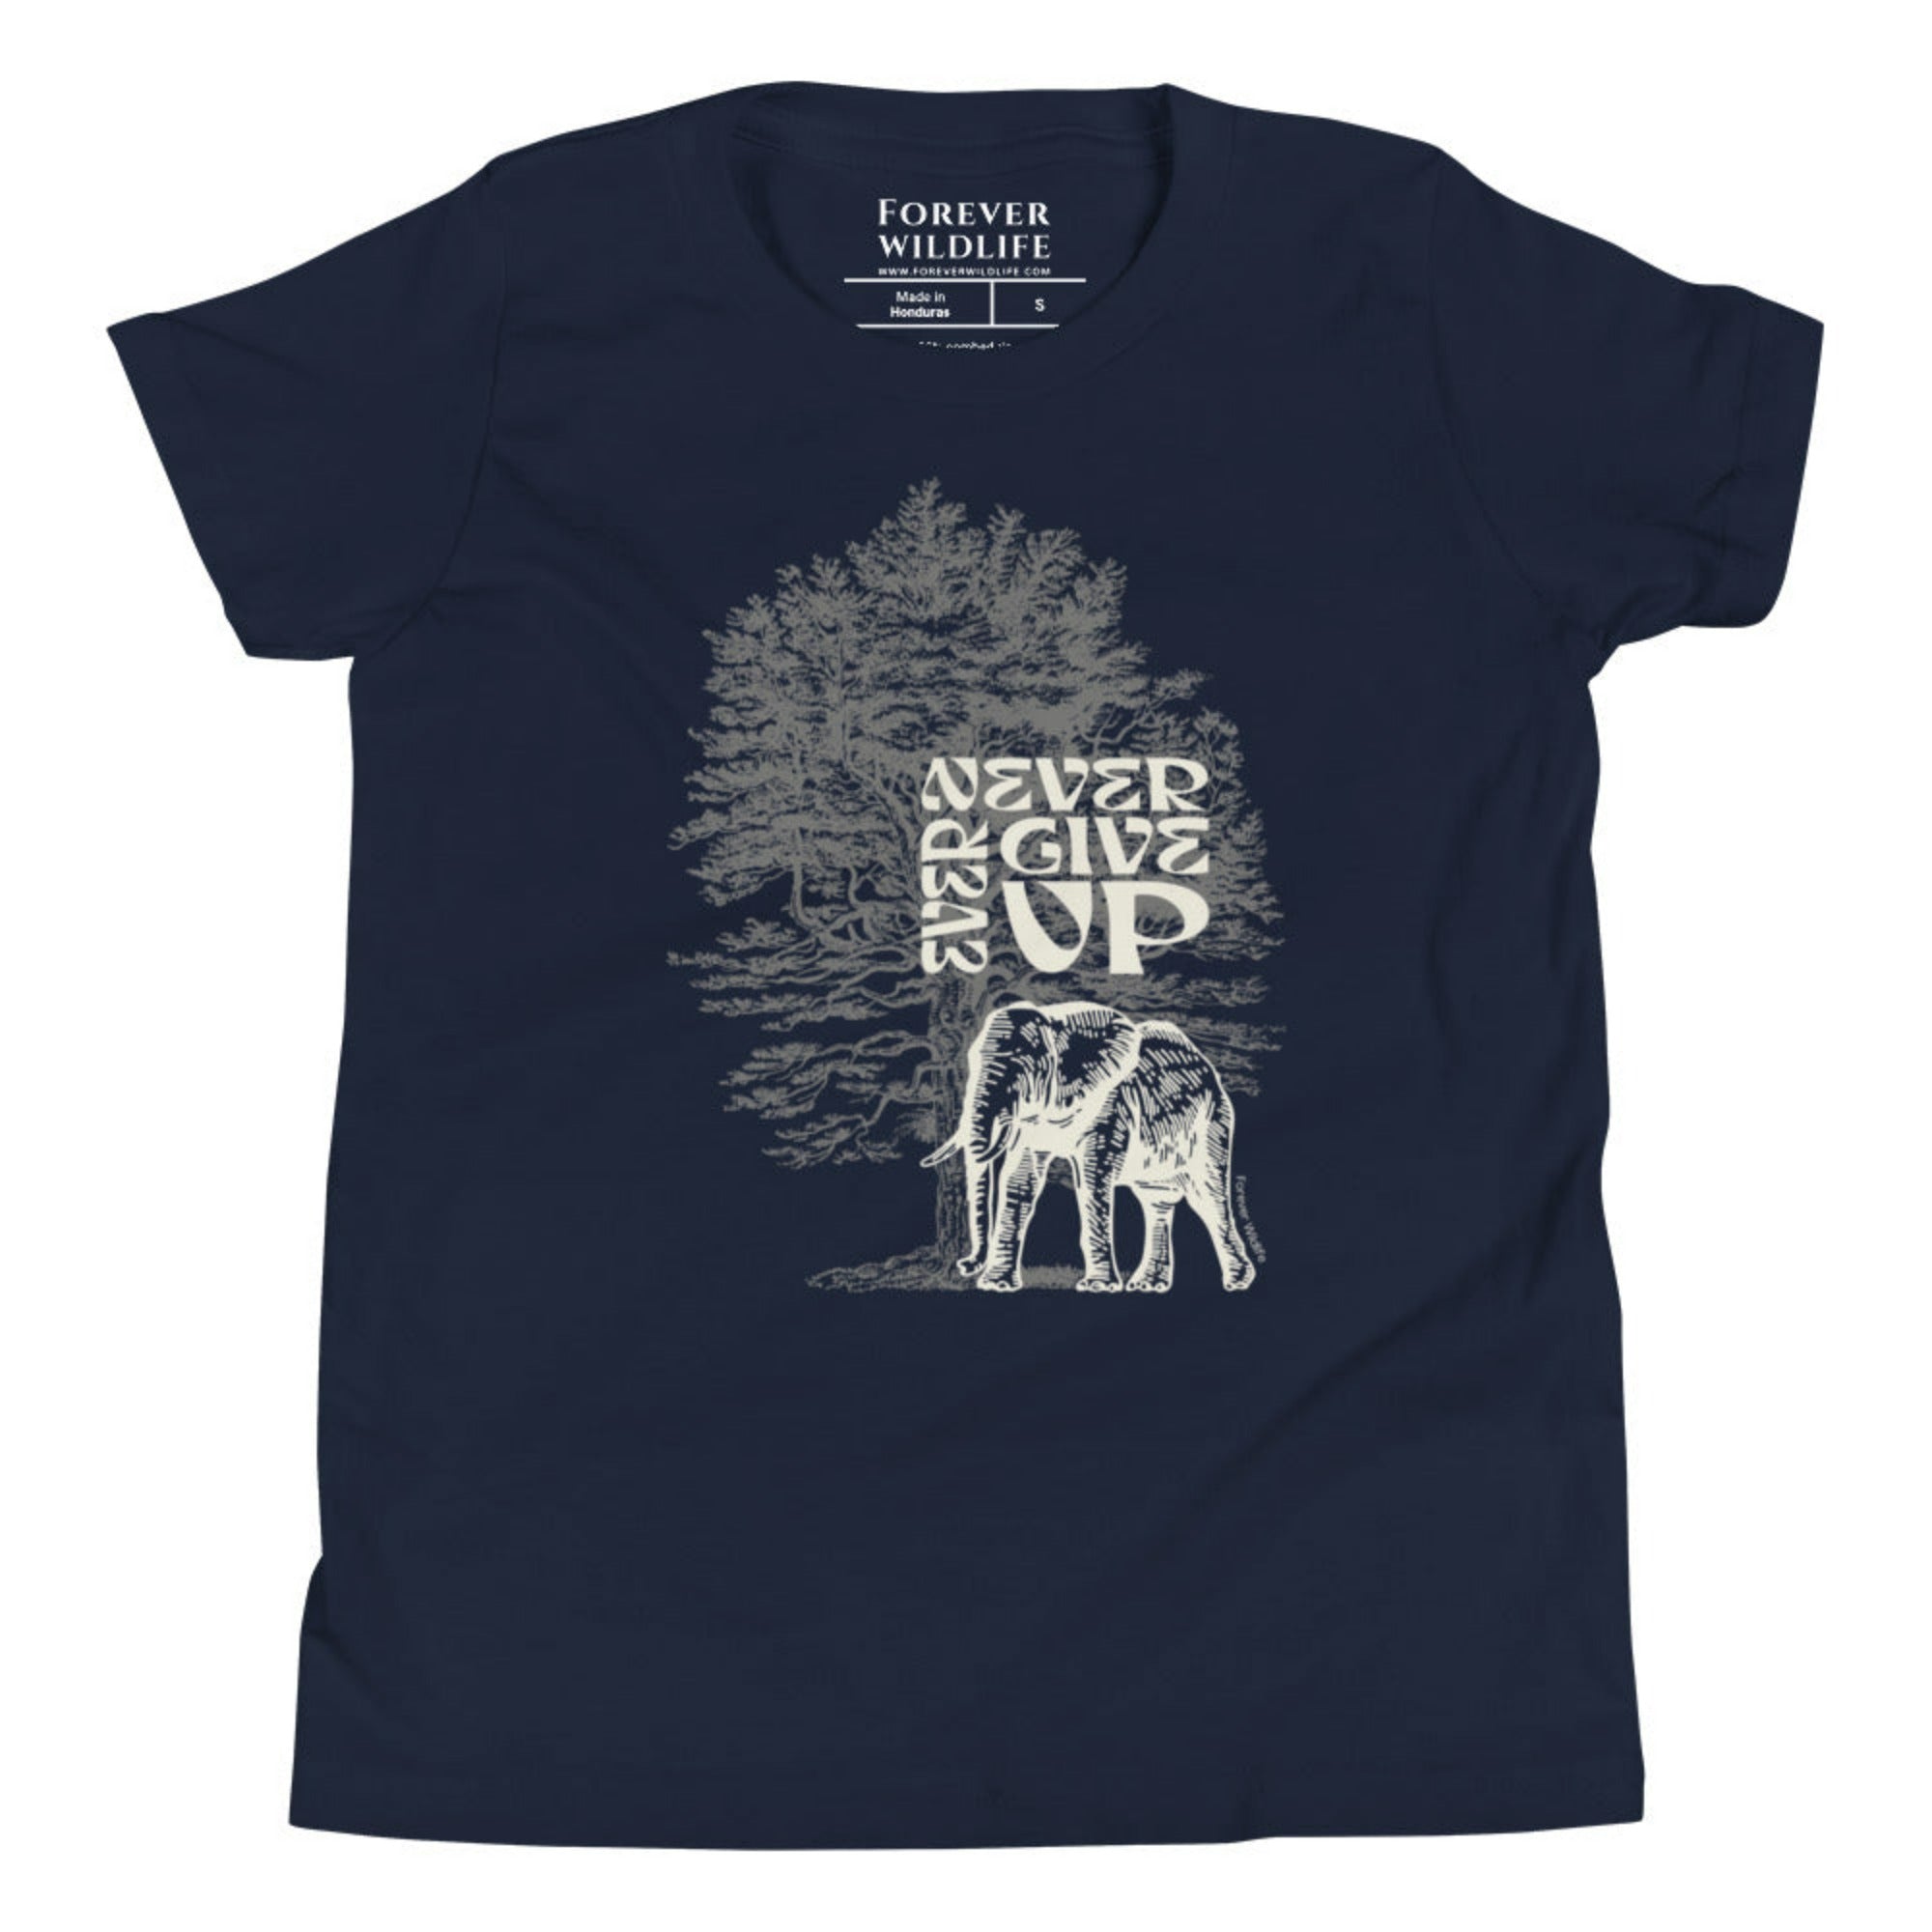 Navy Youth T-Shirt with Elephant graphic as part of Wildlife T-Shirts, Wildlife Clothing & Apparel by Forever Wildlife